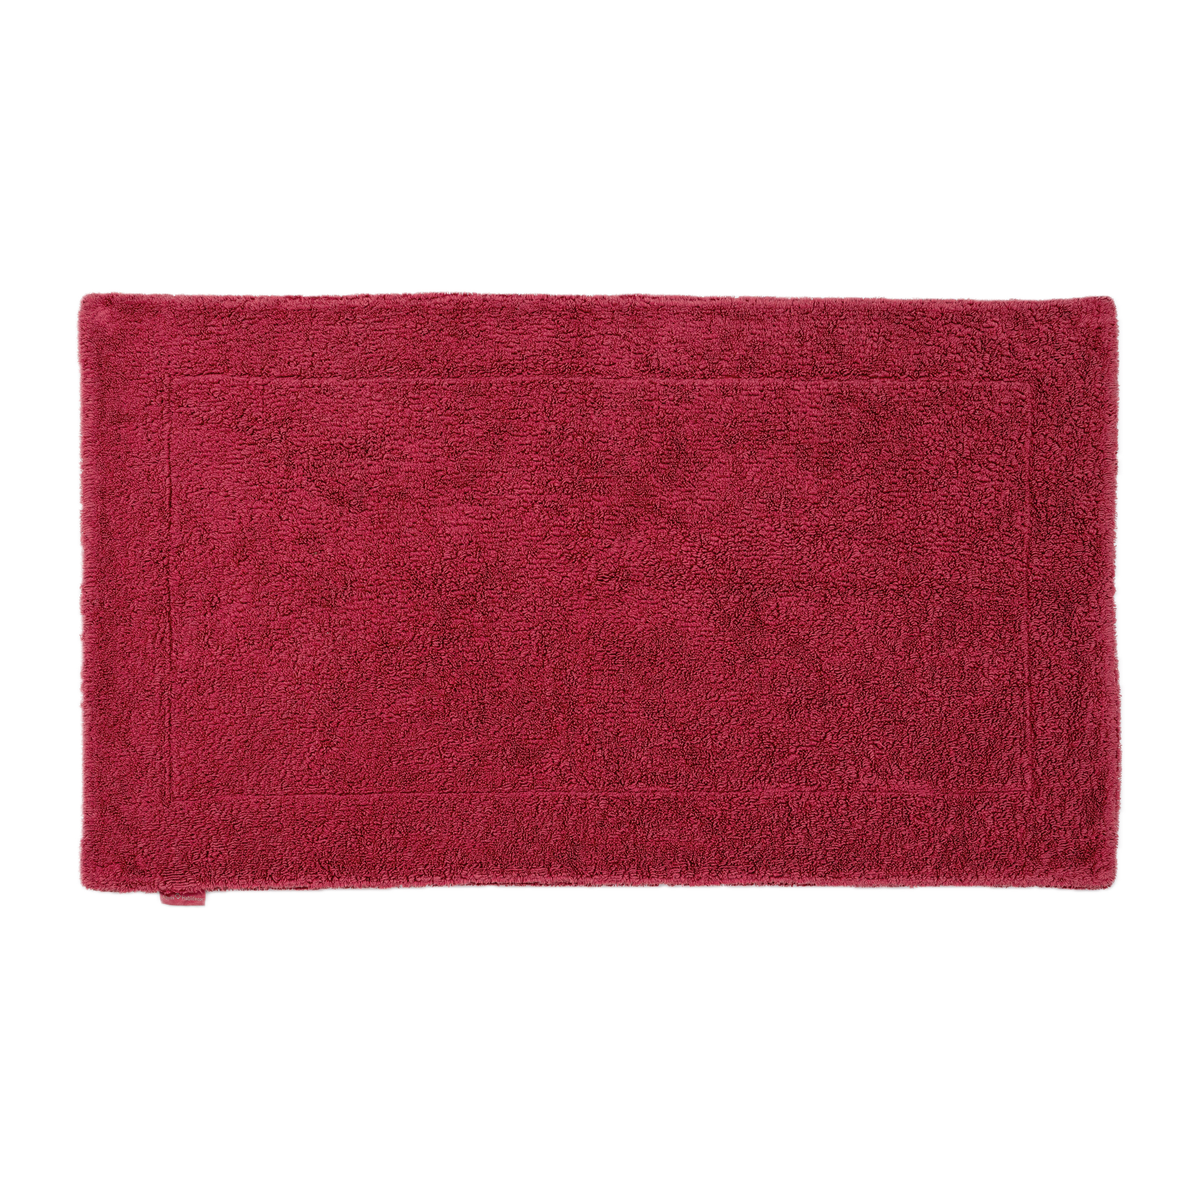 Abyss Super Pile Bath Mat in Canyon Color